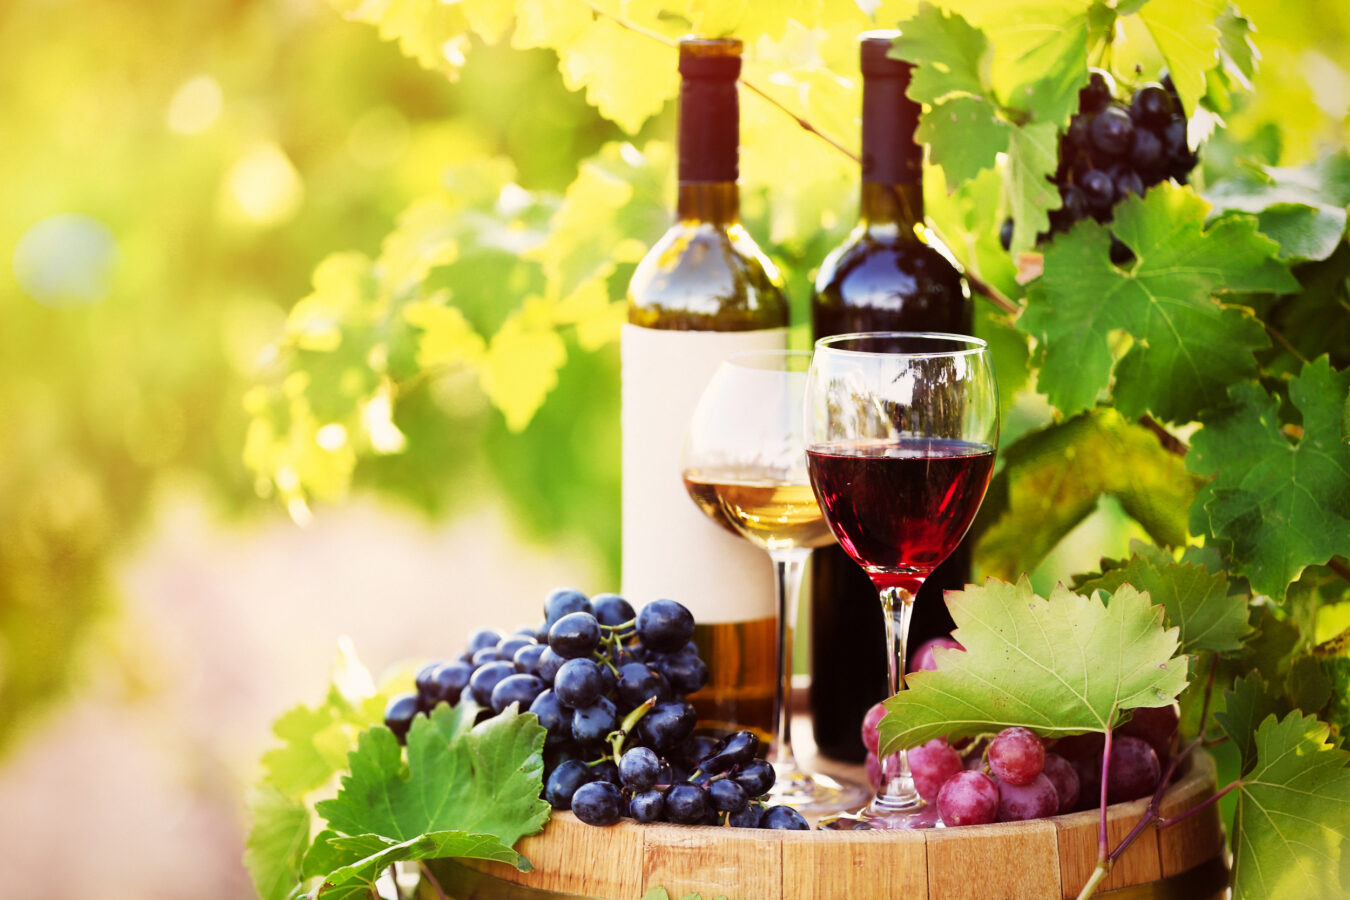 Rhodes wine Athiri and Amorgiano are the top varieties to discover during your visit.